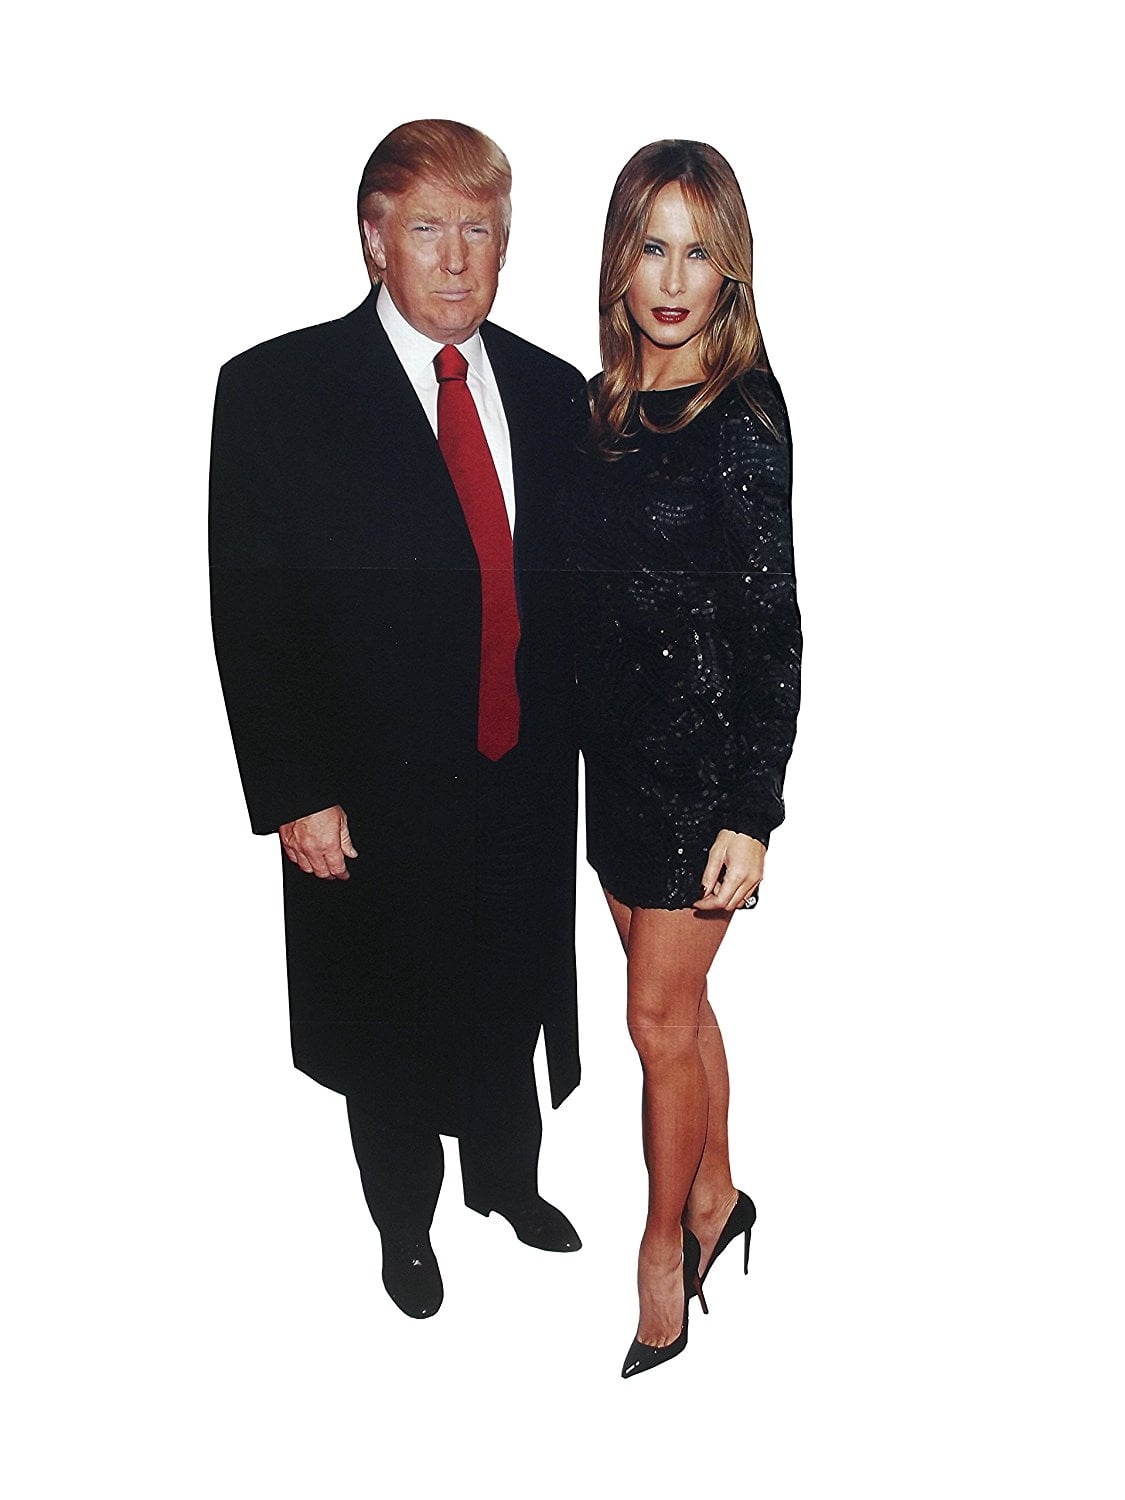 DONALD TRUMP President Lifesize CARDBOARD CUTOUT Standee Standup Poster Red Tie 